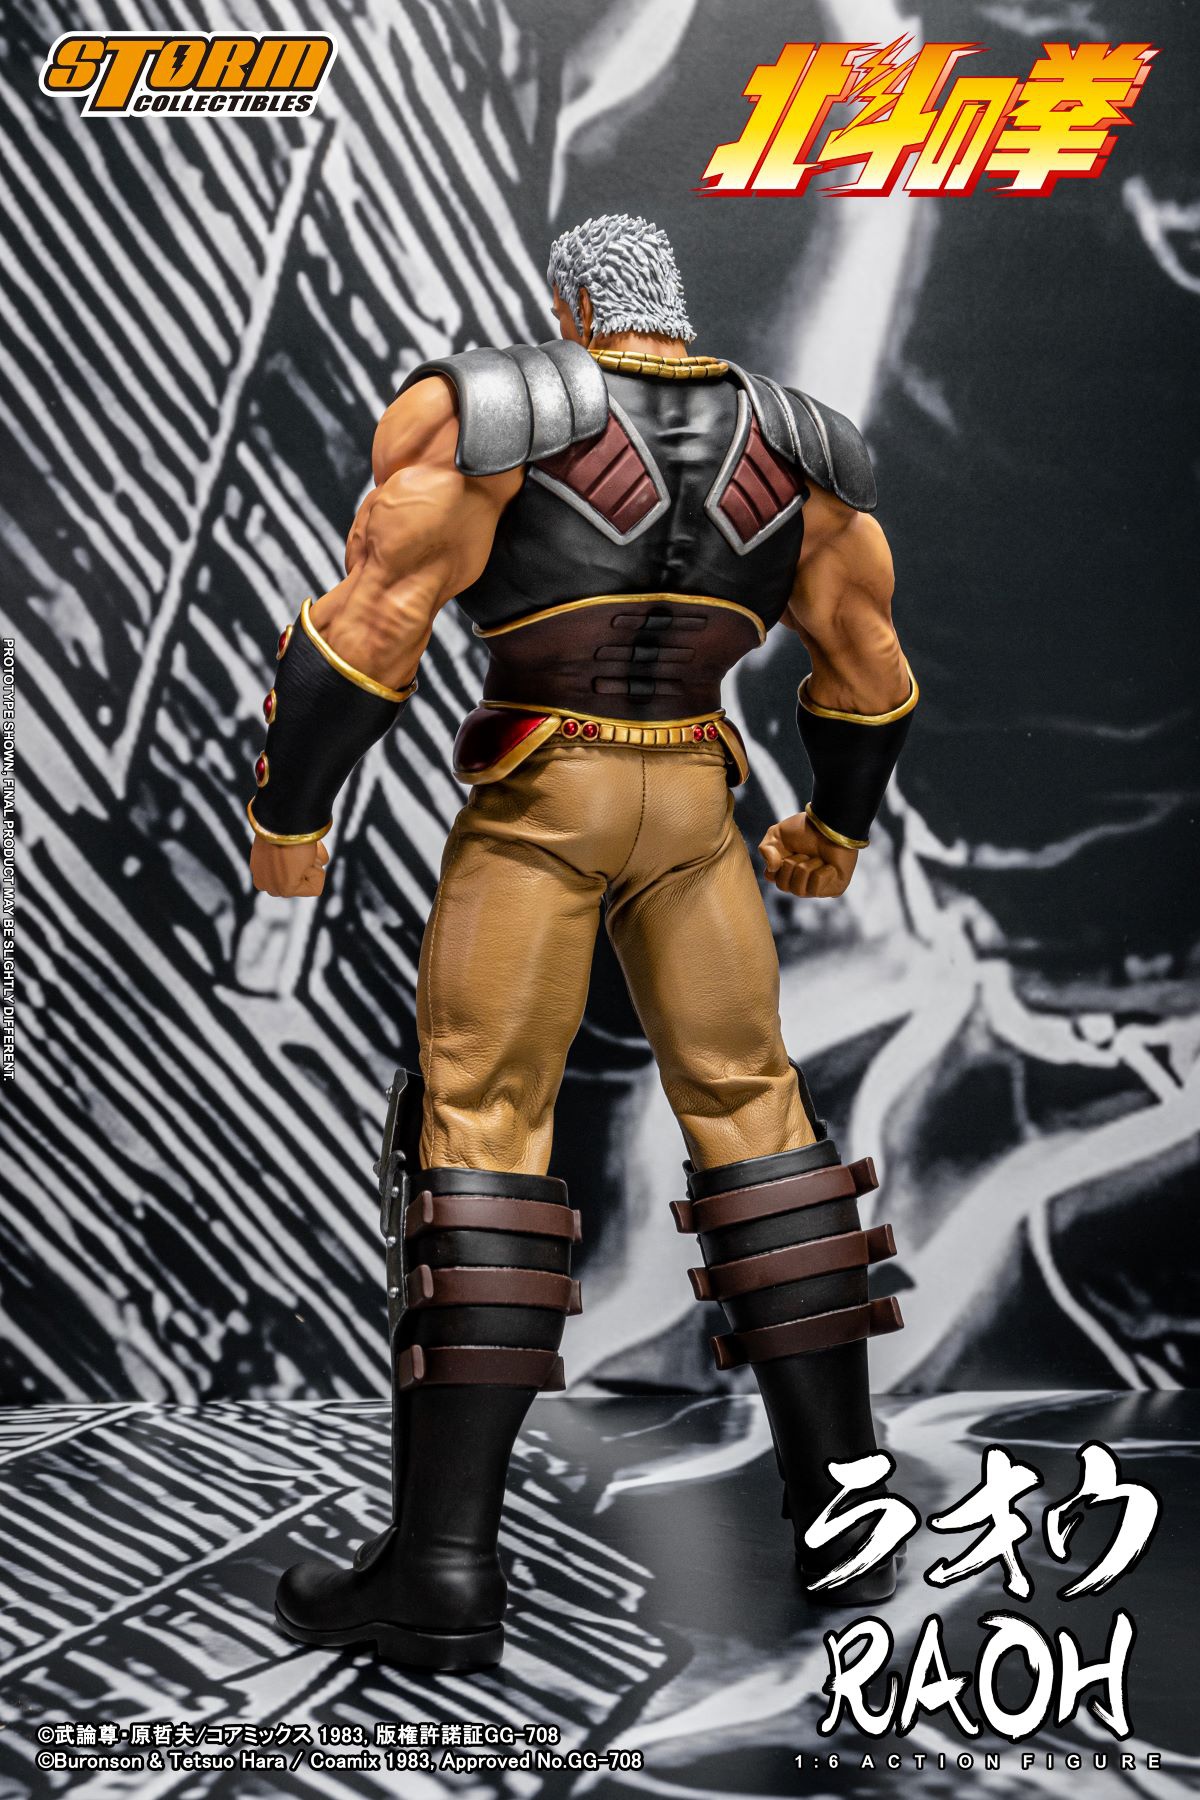 NEW PRODUCT: Storm Collectibles - "Fist of the North Star" RAOH 04139